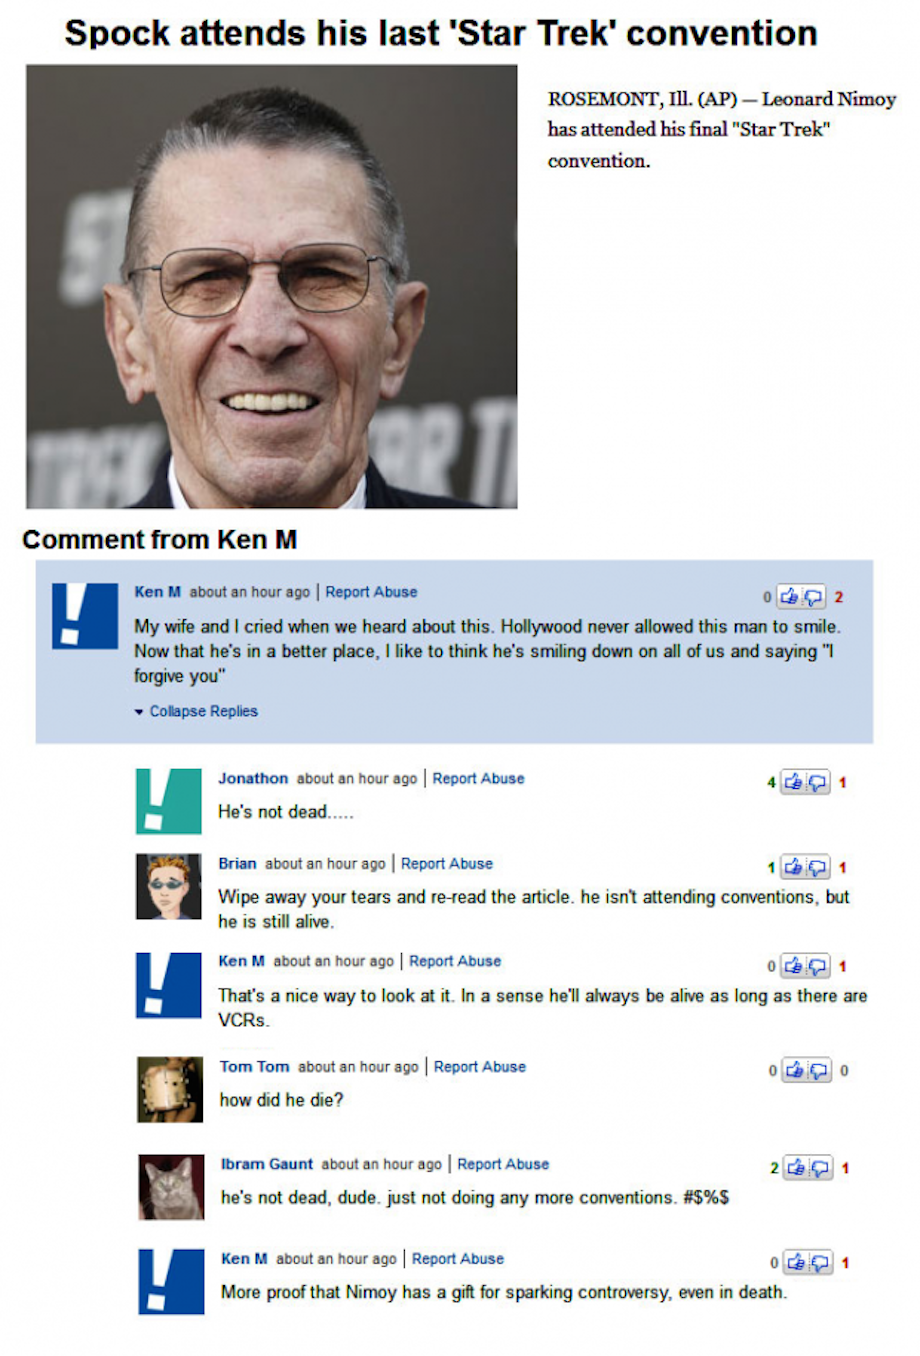 ken m leonard nimoy - Spock attends his last 'Star Trek' convention Rosemont Ap Leonard Nimoy has attended his final "Star Trek Comment from Ken M en M oth 2 My wife and I cried when we heard about the Hollywood worked this man to make Now that he's inatt